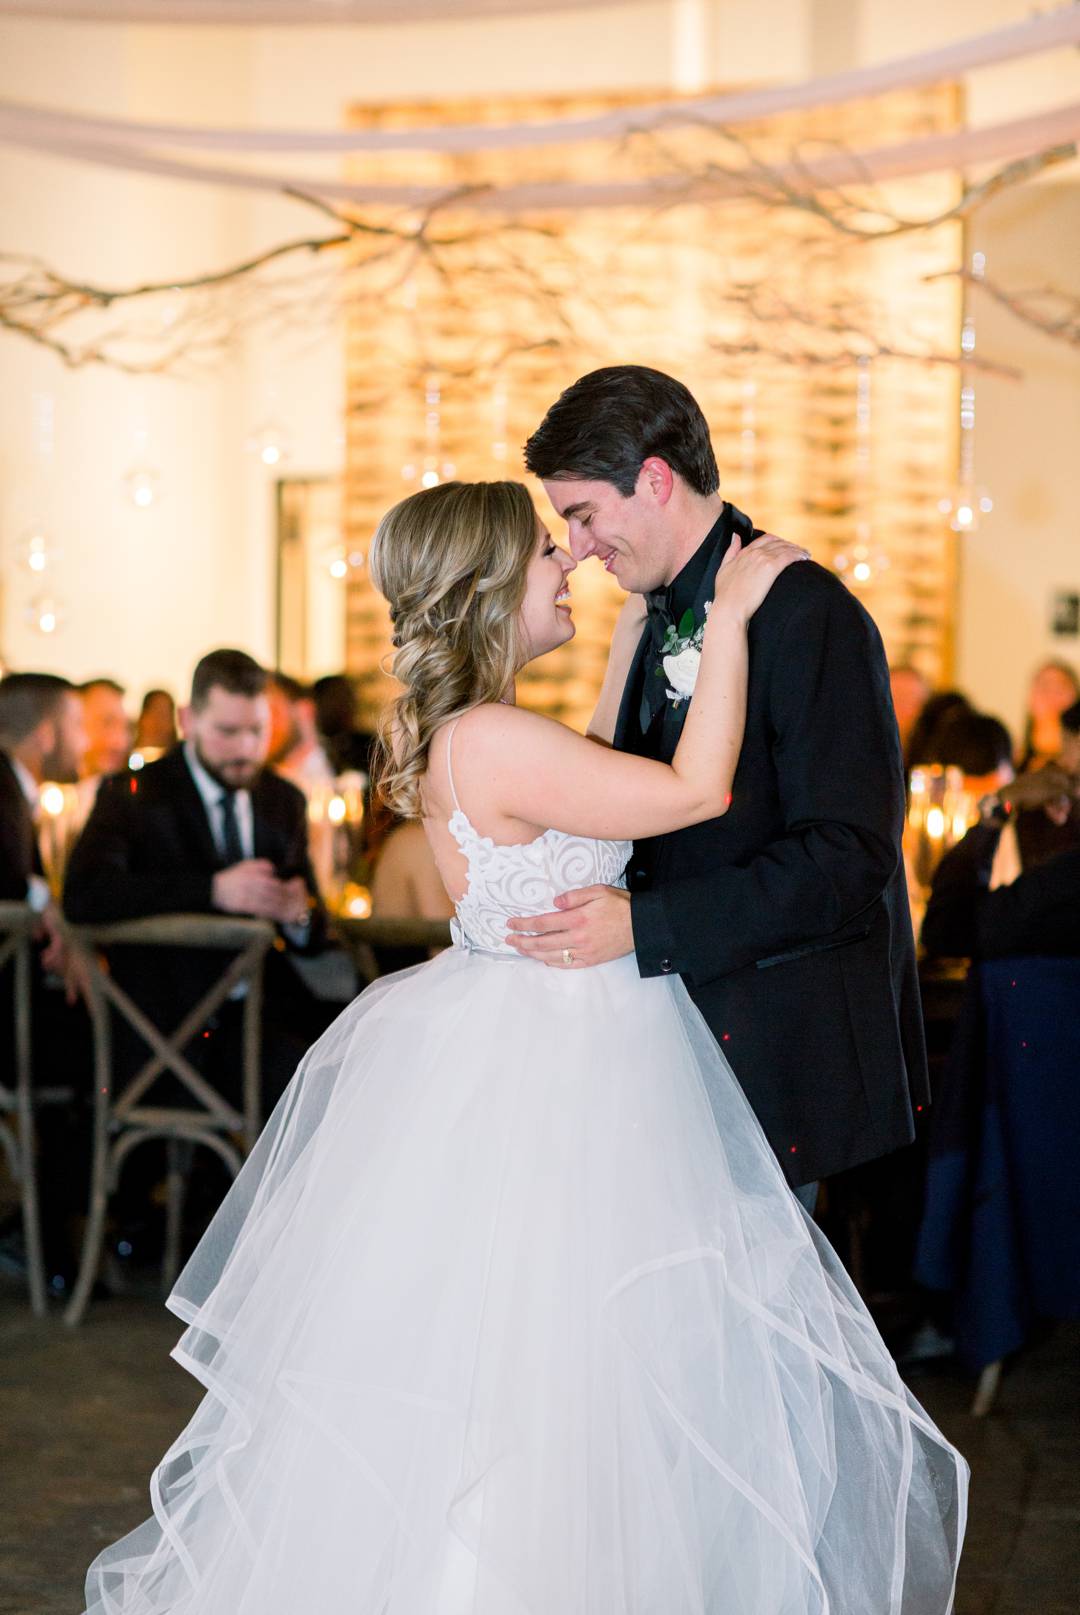 First dances at this NYE wedding at the Stave Room by Atlanta wedding photographer Leigh Wolfe Photography.